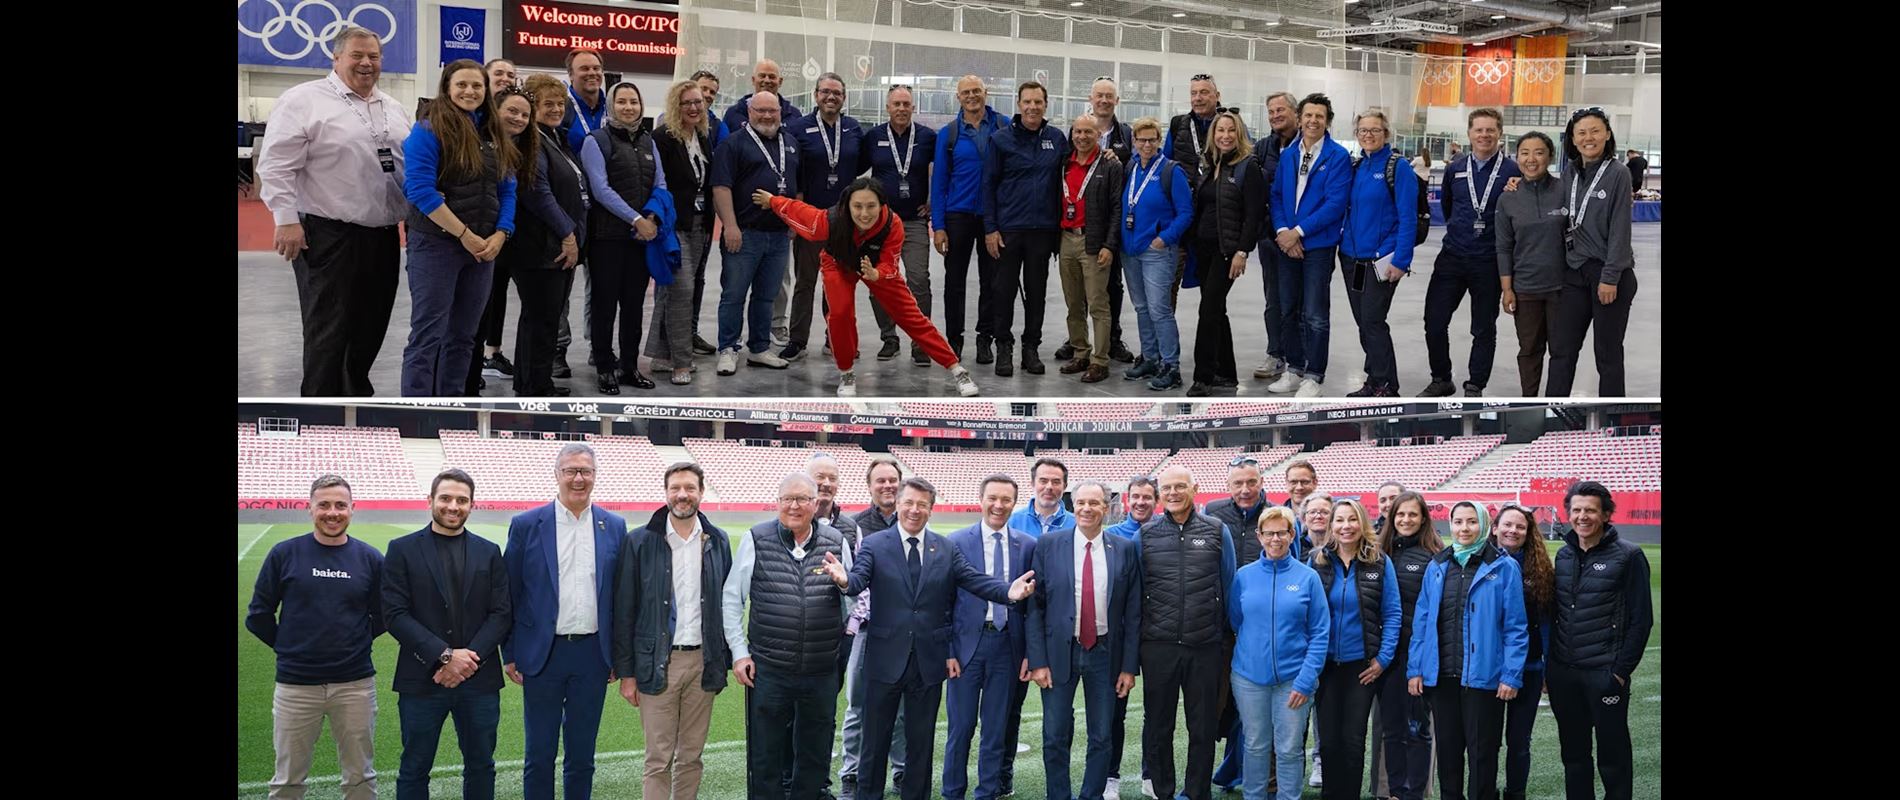 Successful visits by the Future Host Commission an important step towards host election for the Olympic Winter Games 2030 and 2034